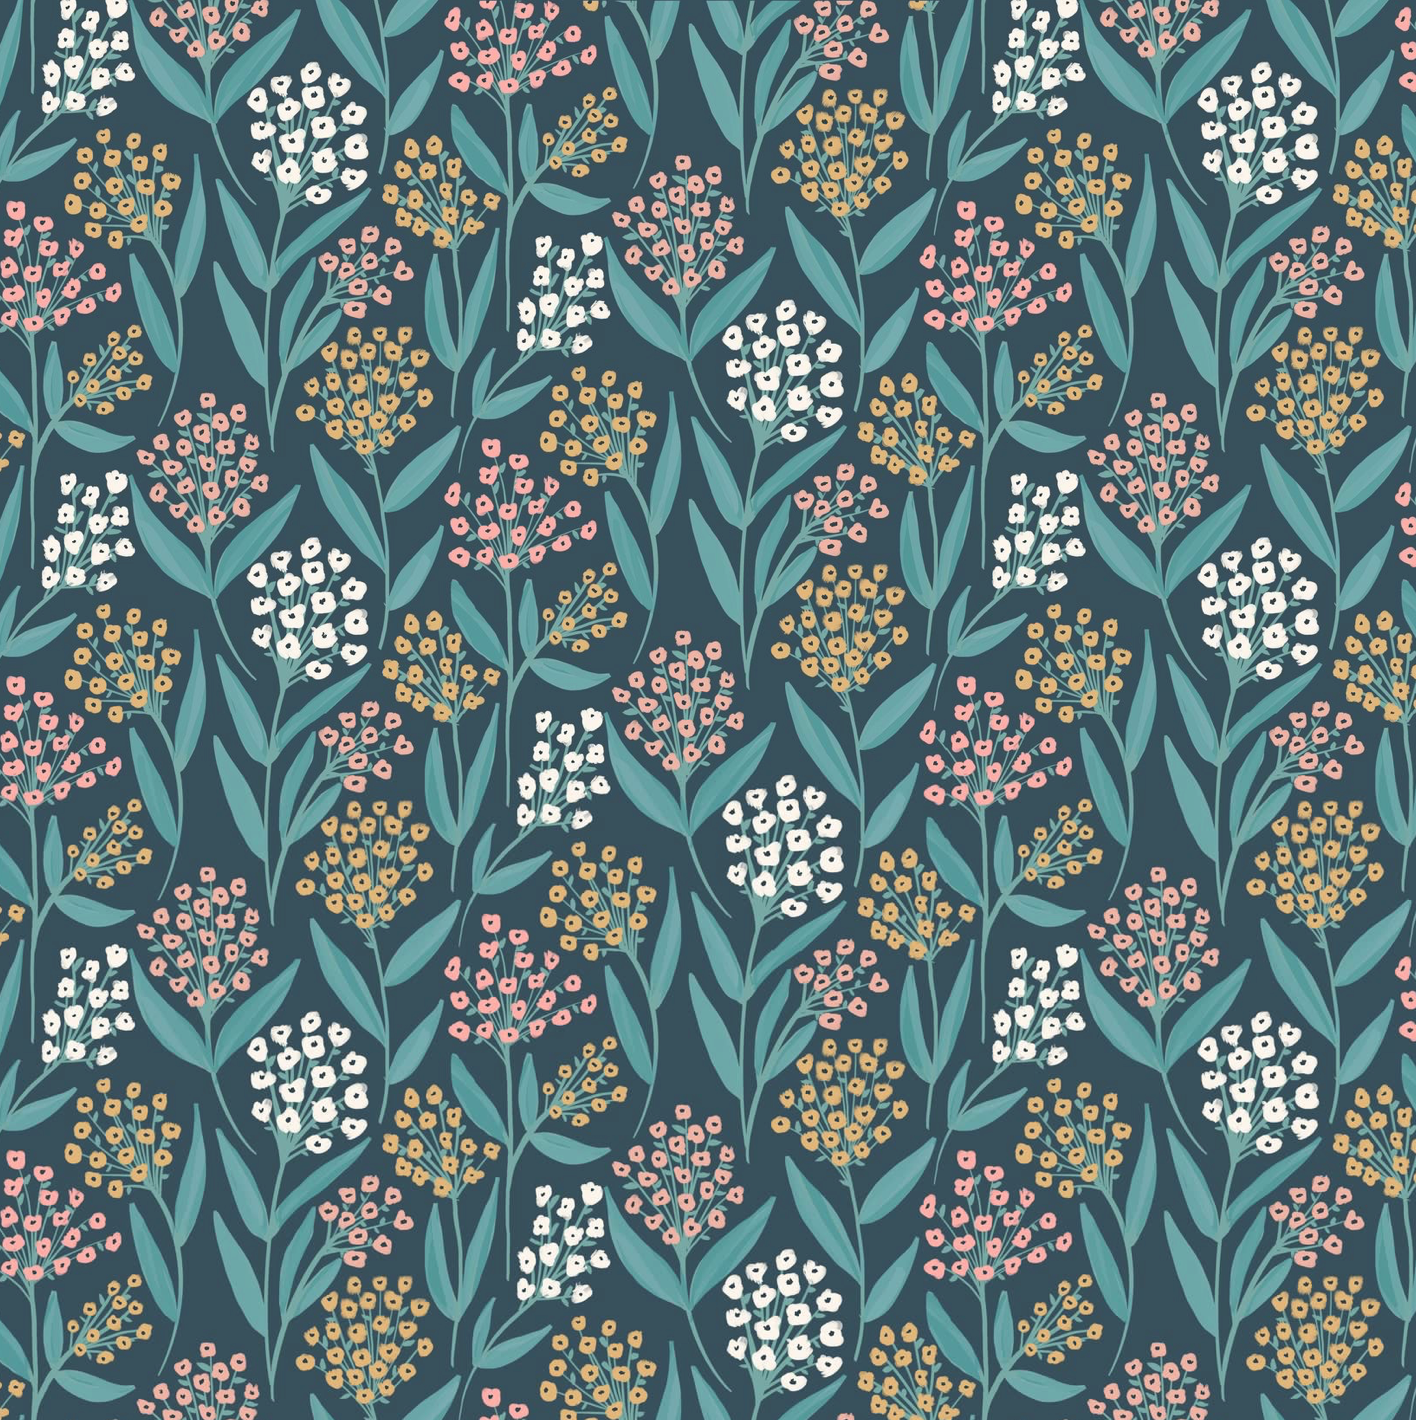 Painted Blossoms Barely Buds Navy PB24669, sold by the 1/2 yard, *PREORDER